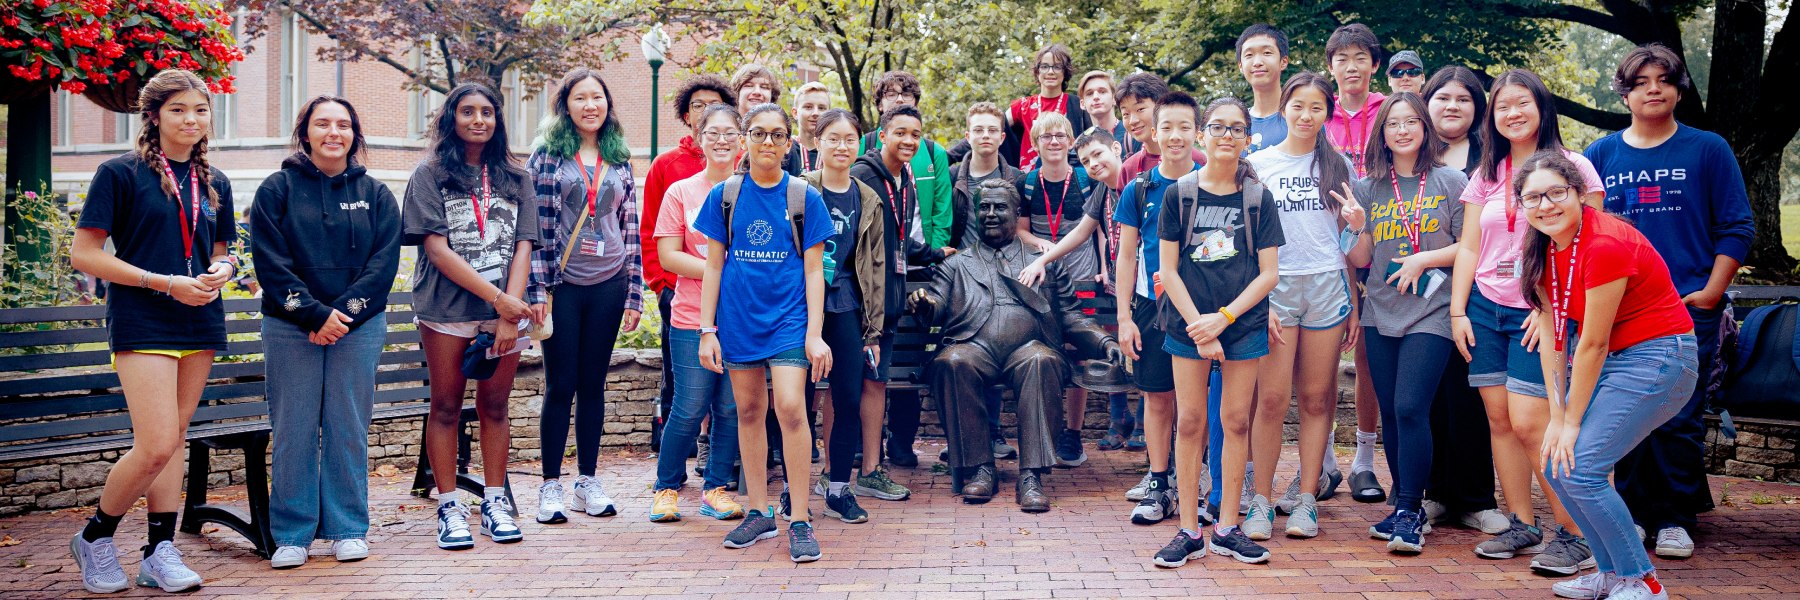 Group shot of young debaters near Herman B Wells statue